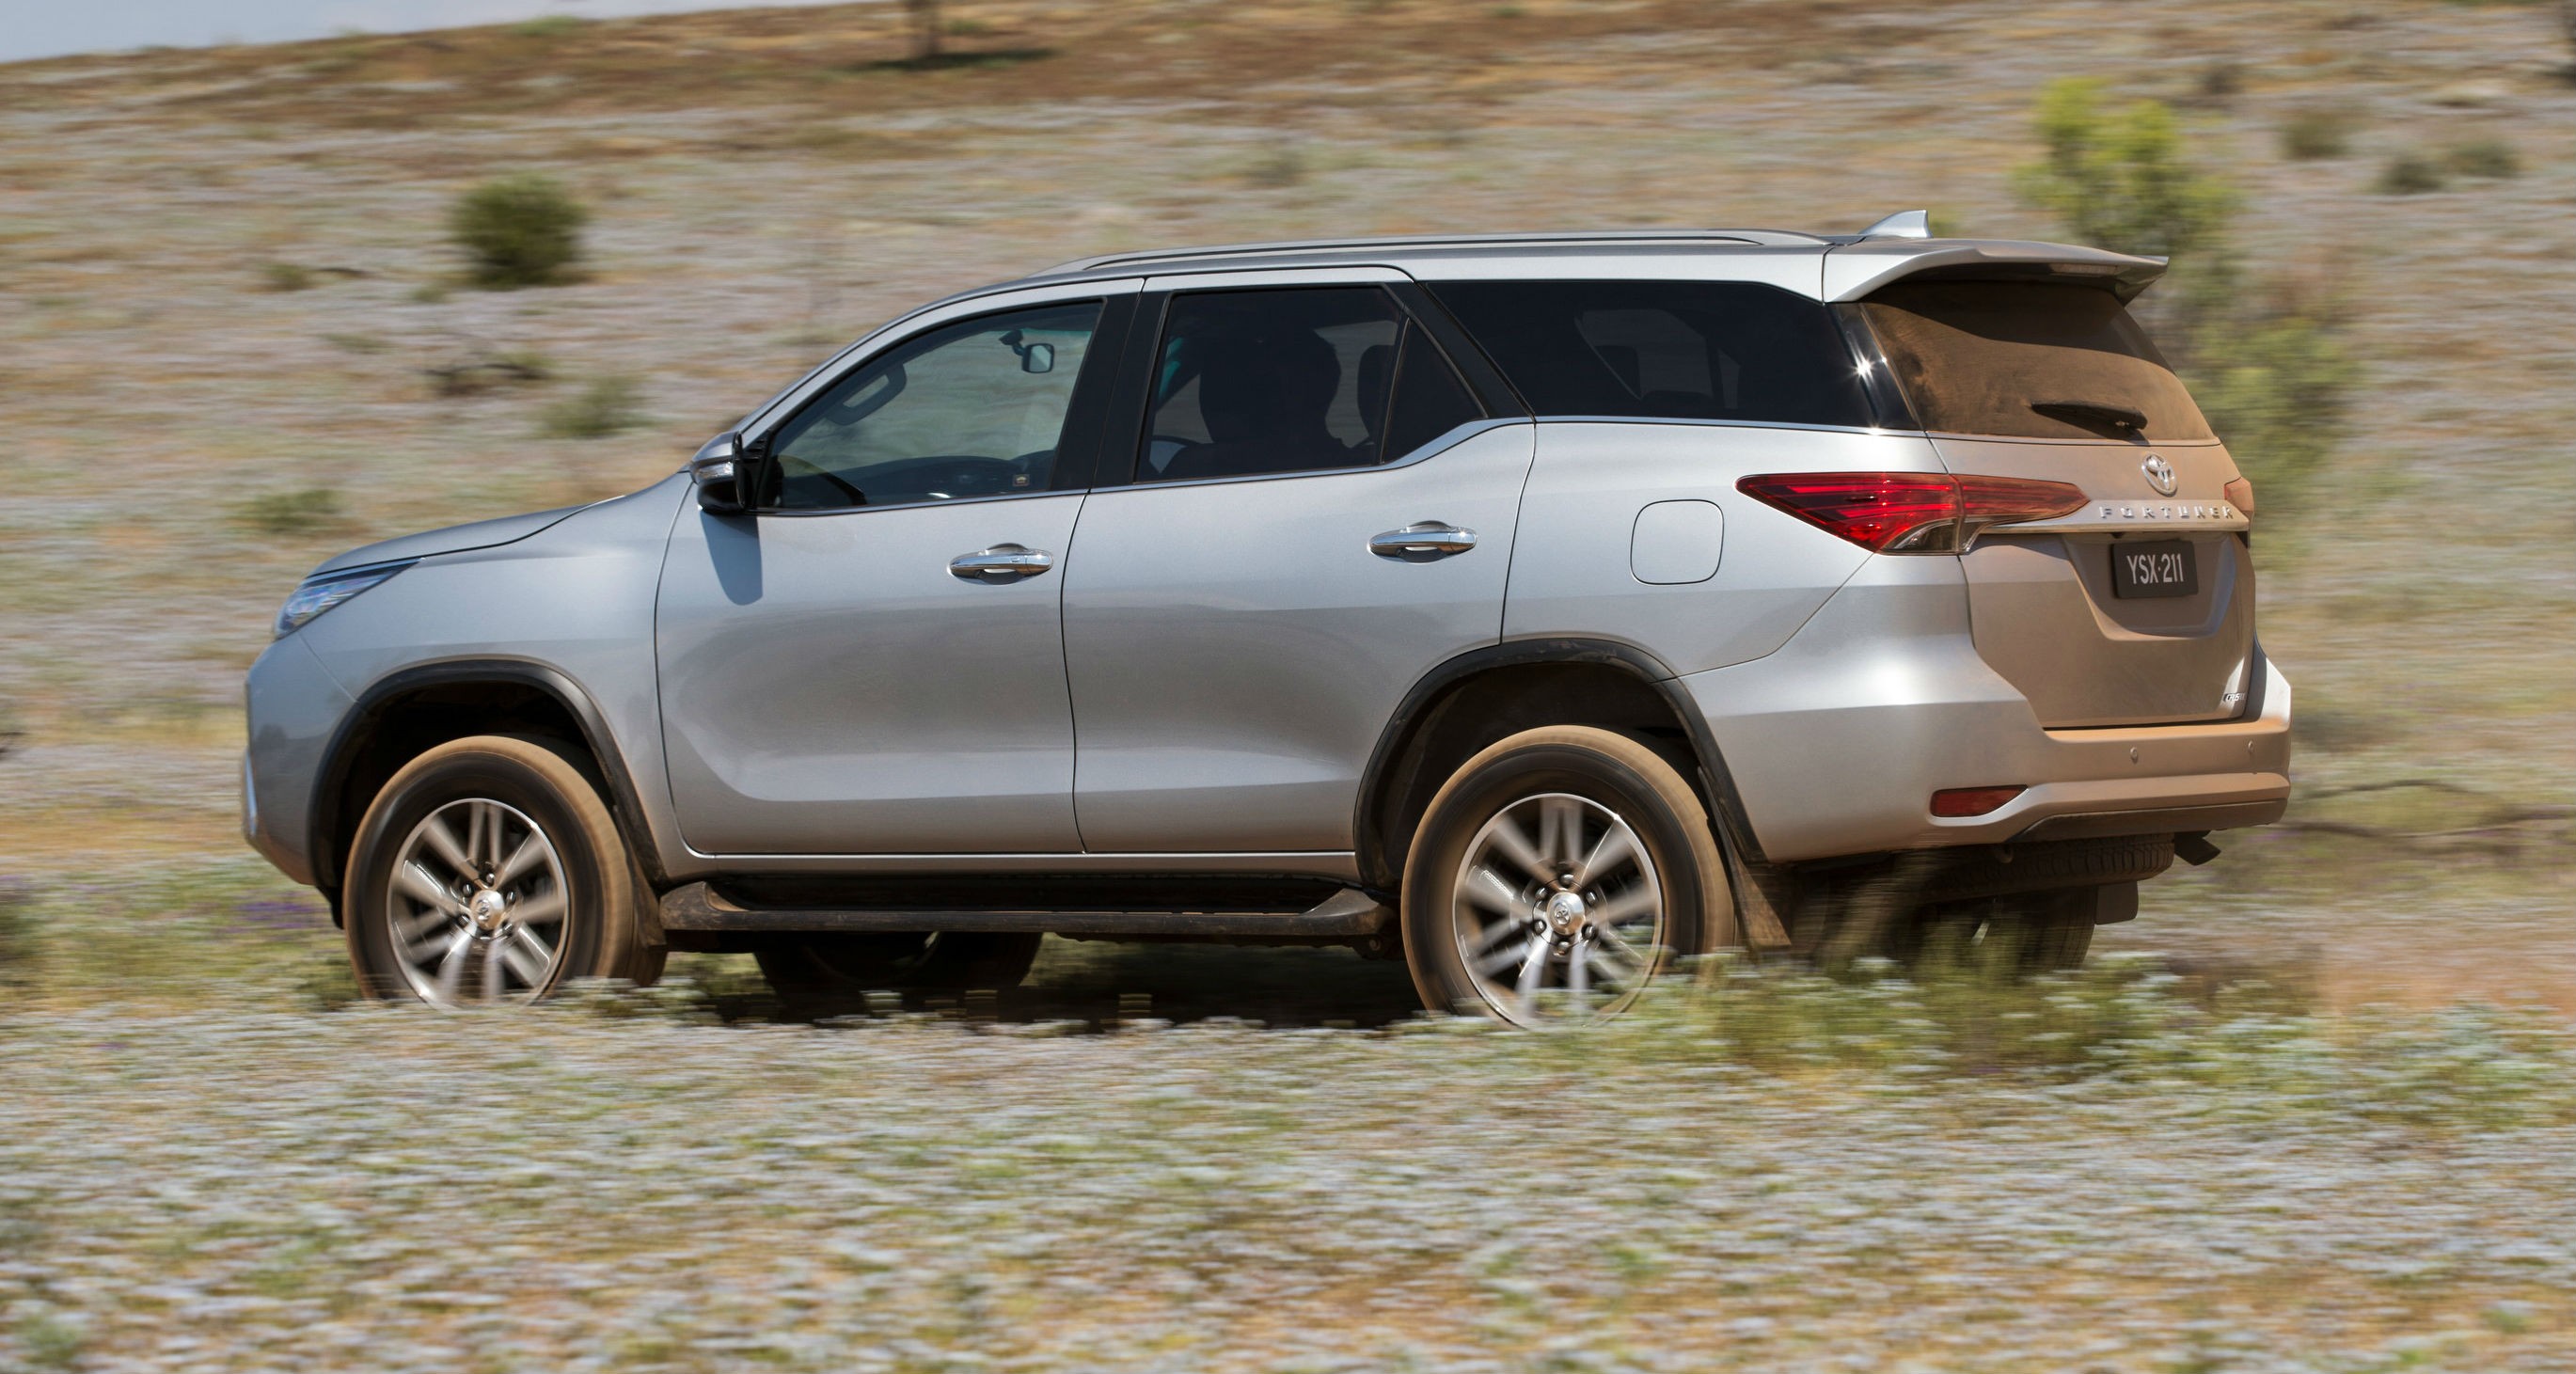 Toyota Fortuner wallpapers, Vehicles, HQ Toyota Fortuner pictures | 4K